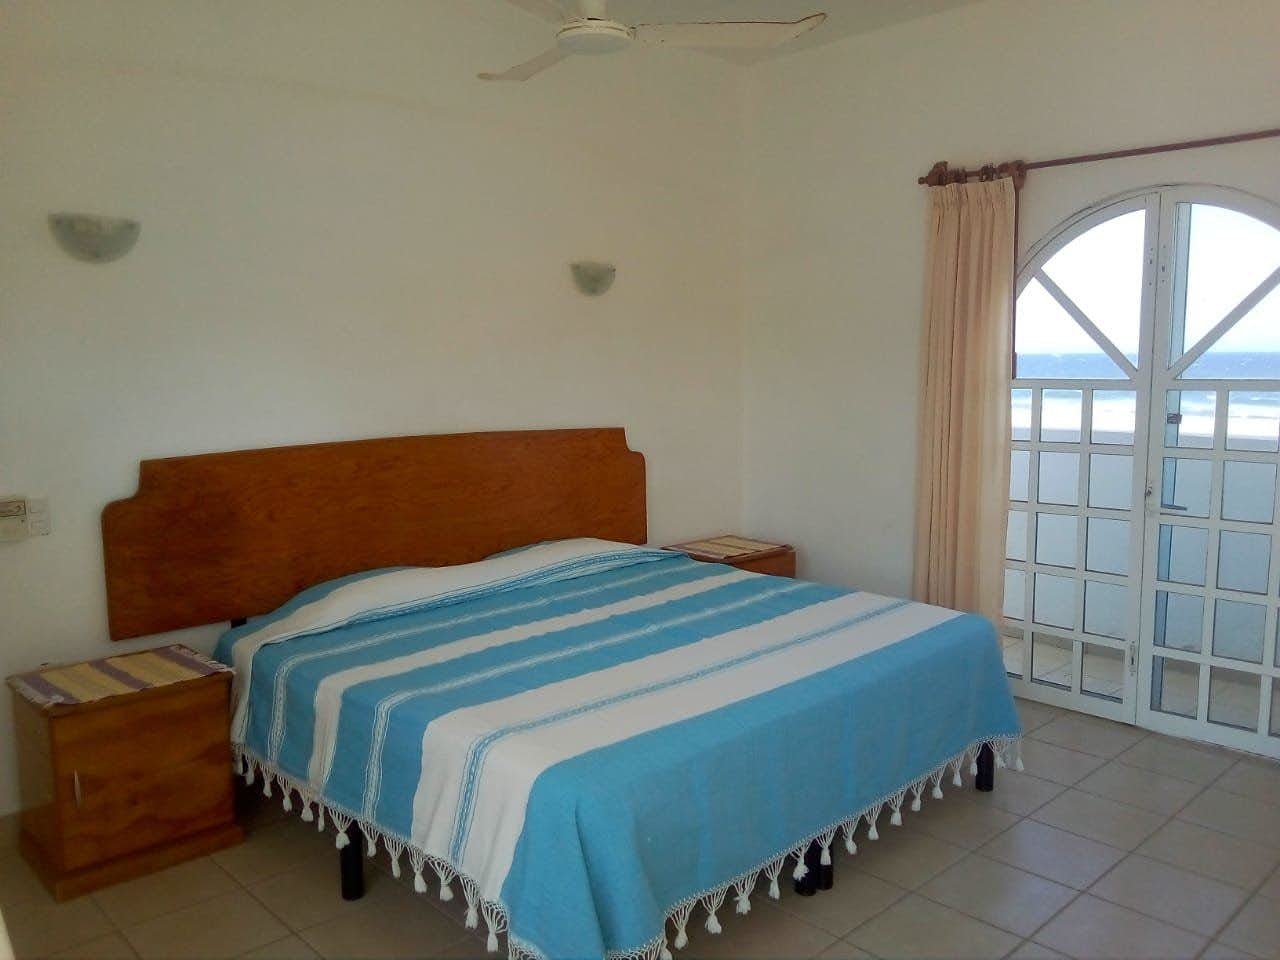 Room with 1 king size bed and balcony